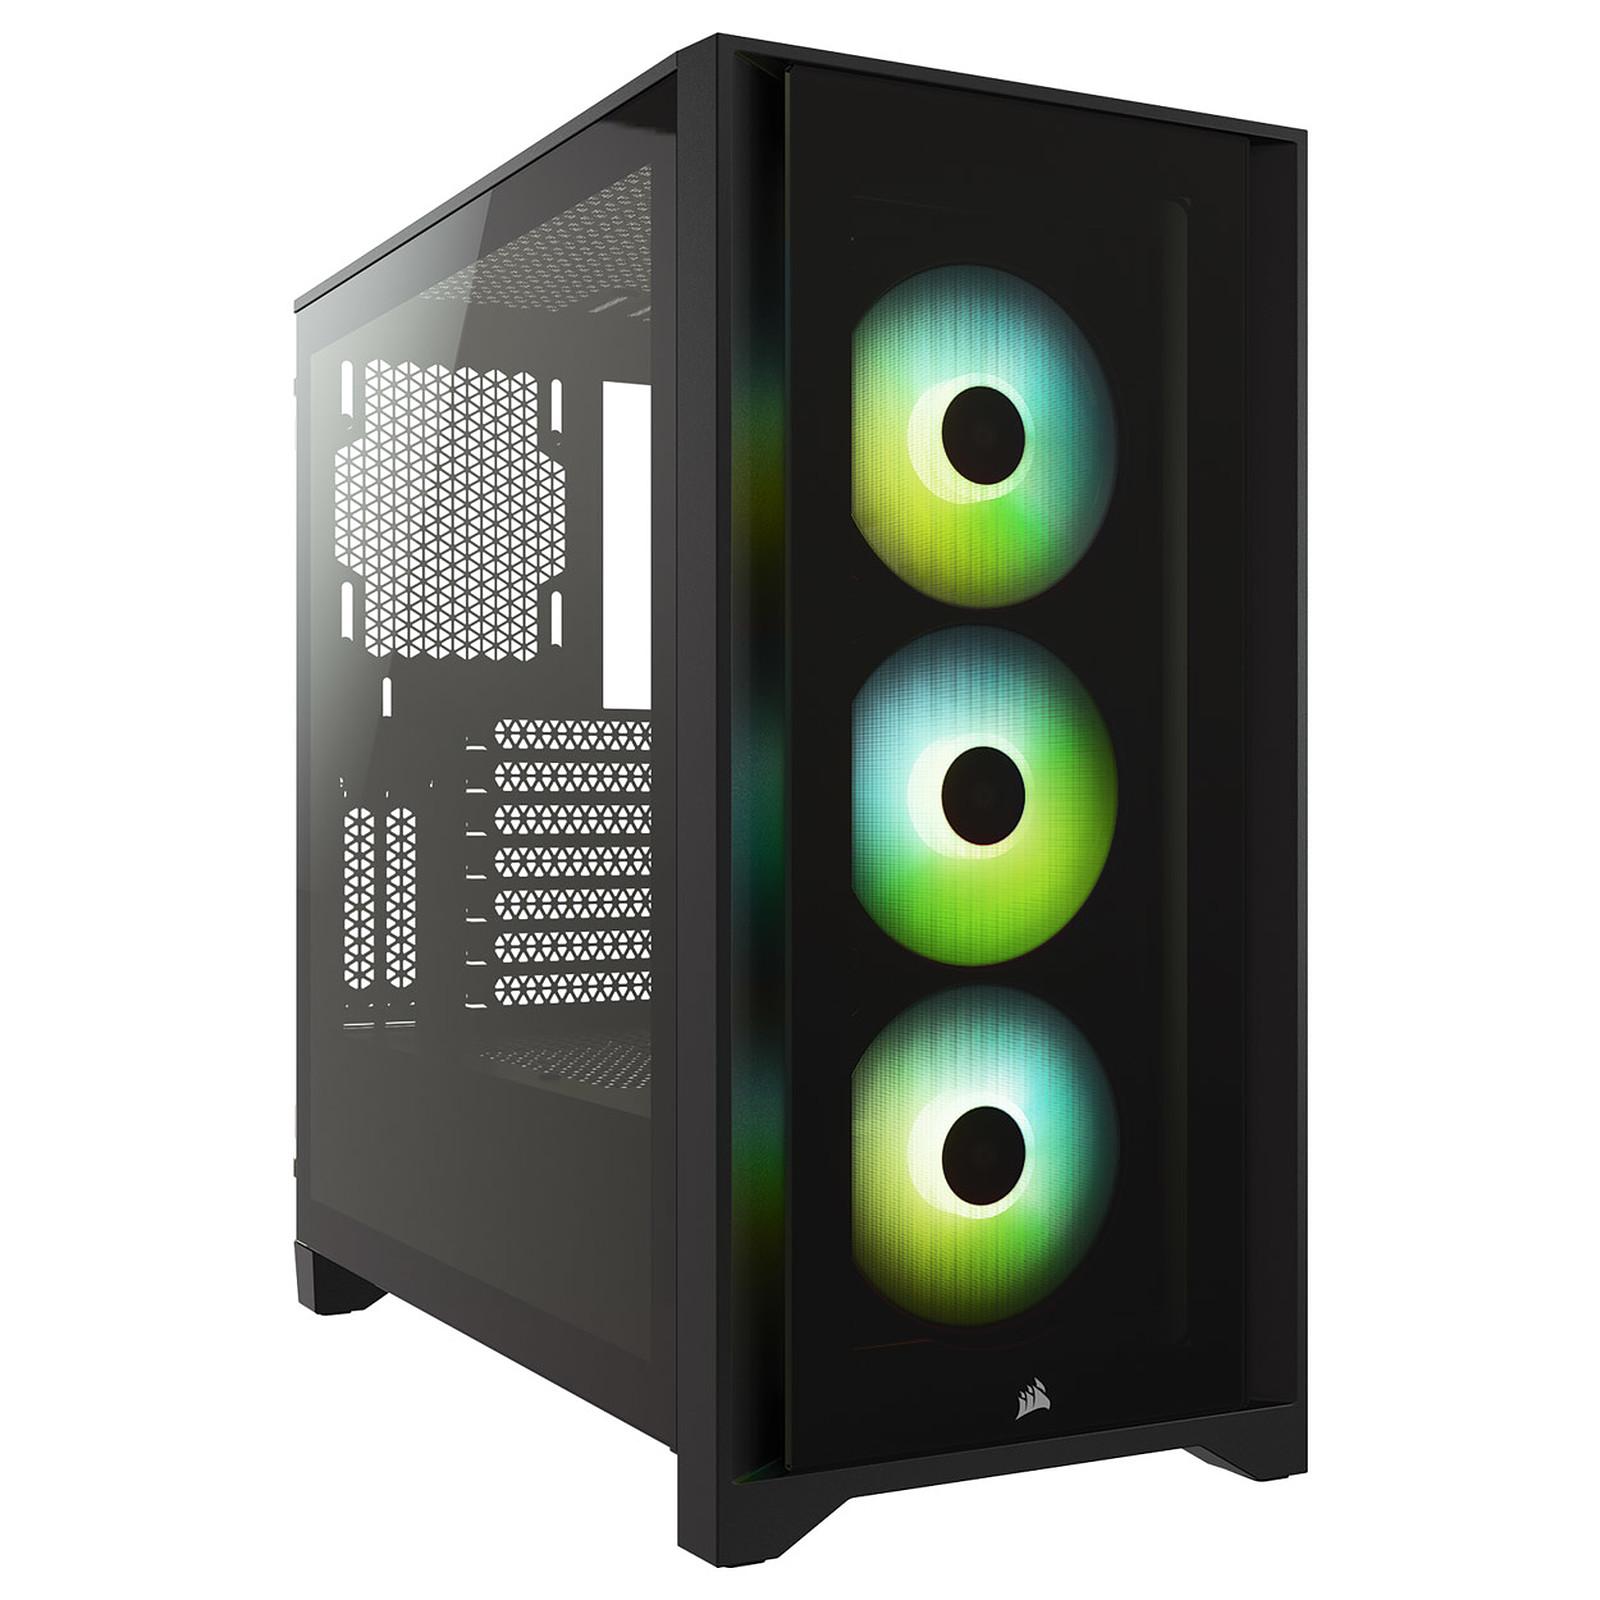 ICUE 4000X RGB TEMPERED GLASS MID-TOWER BLACK